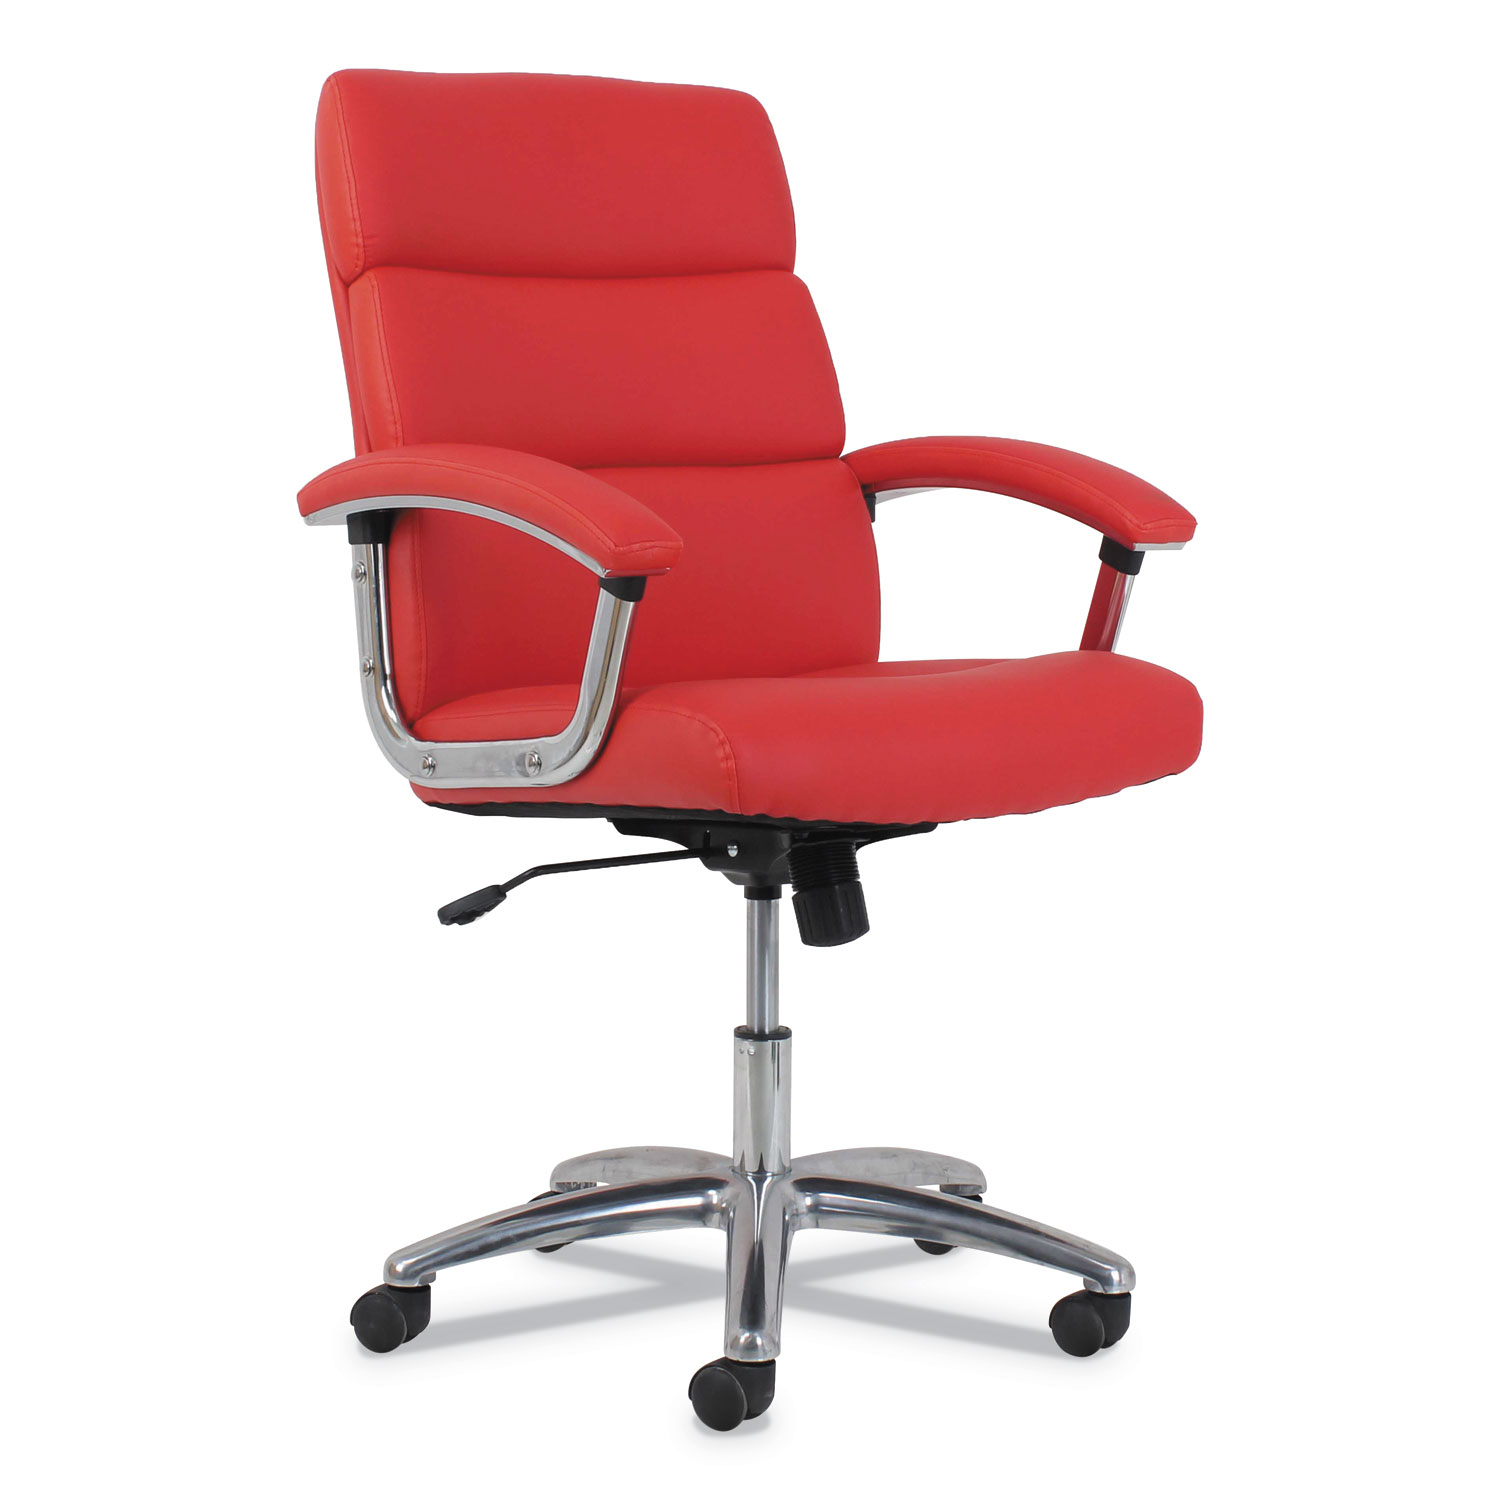  HON HVL103.SB42 Traction High-Back Executive Chair, Supports up to 250 lbs., Red Seat/Red Back, Polished Aluminum Base (HONVL103SB42) 